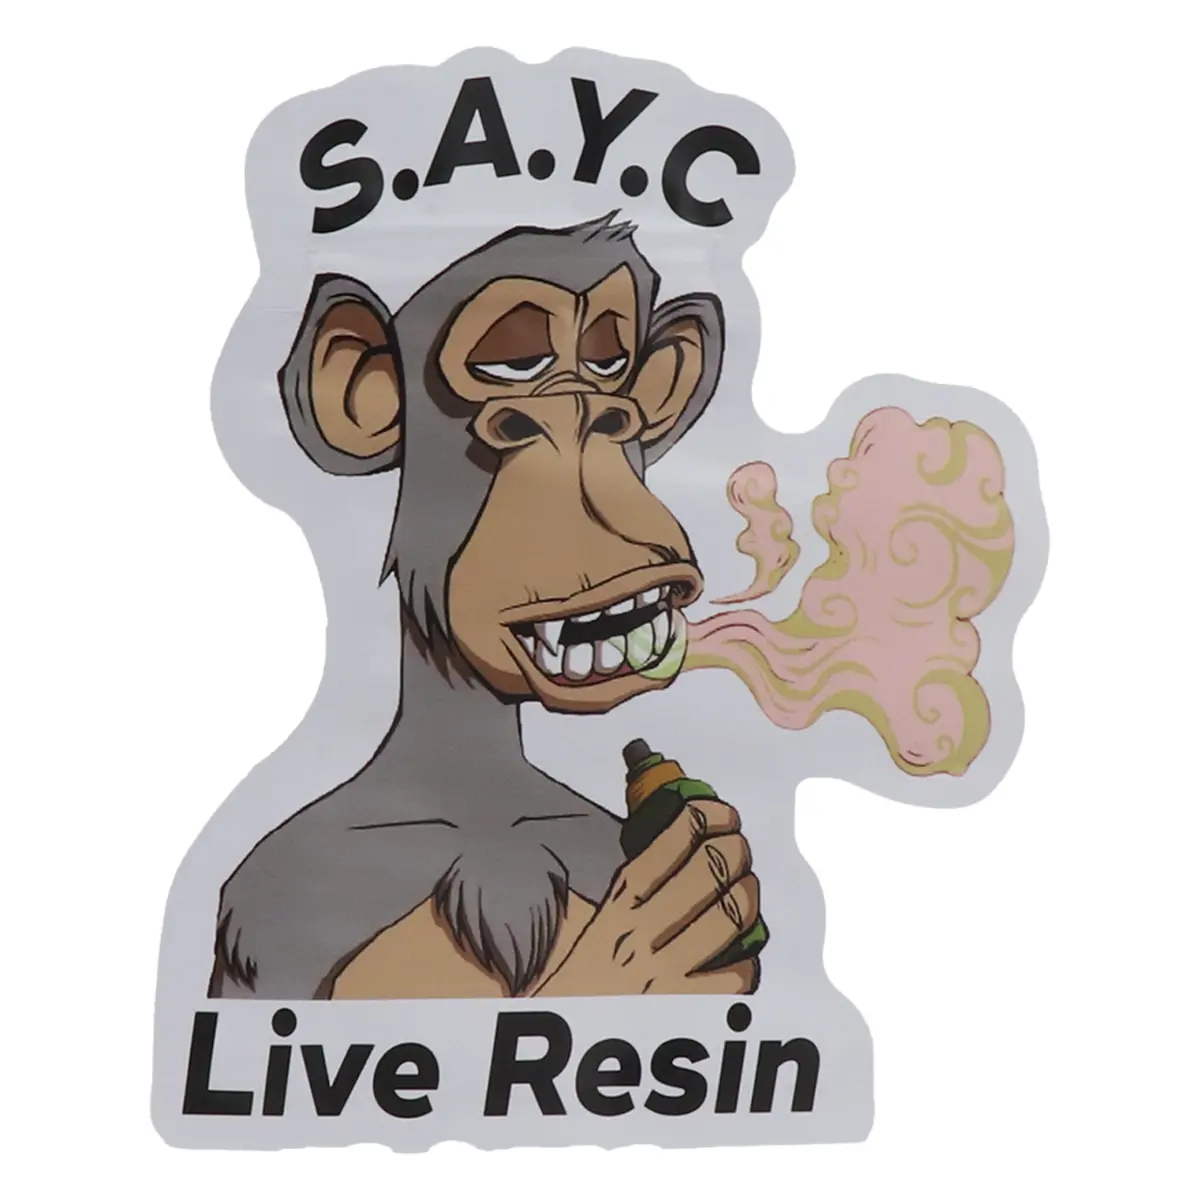 LIVE RESIN S.A.Y.C Smell proof Mylar Bag